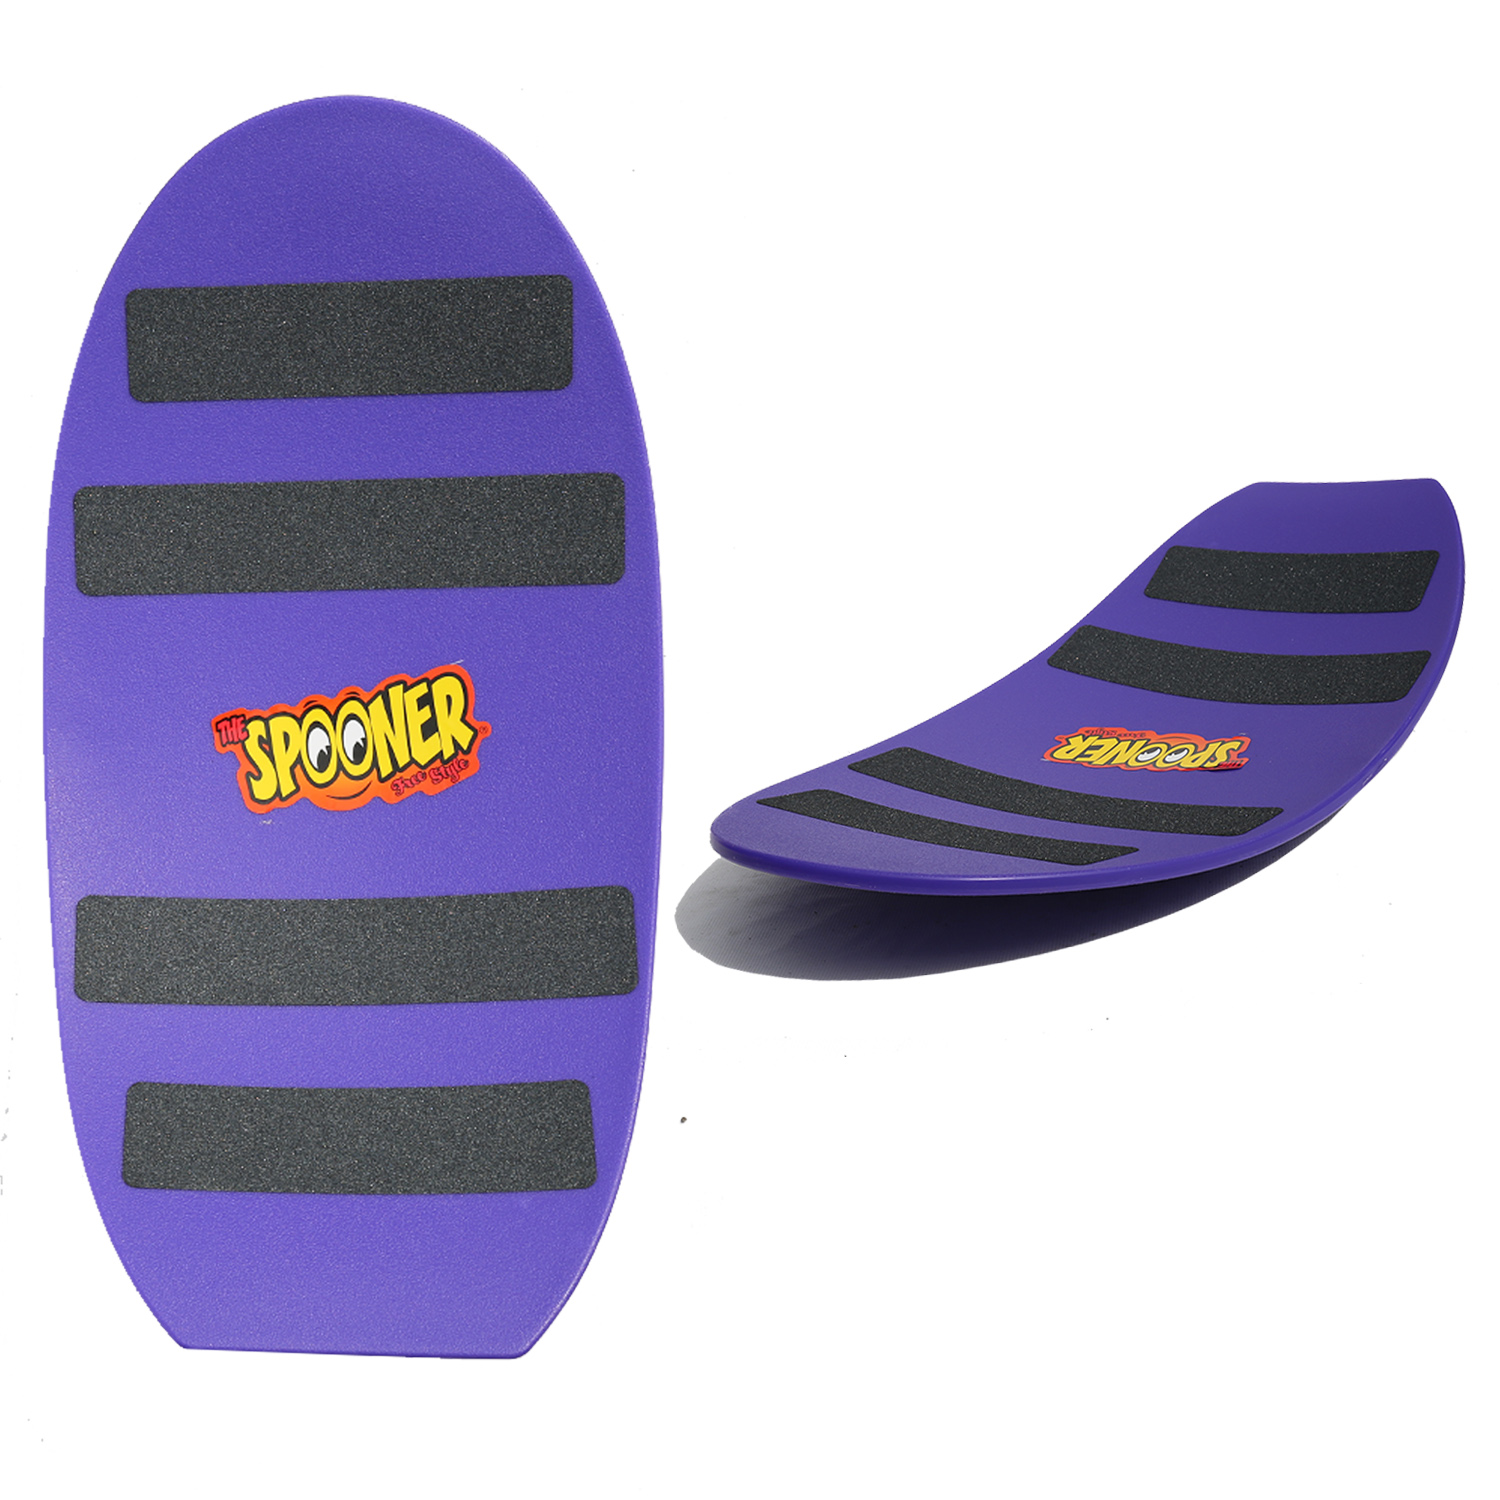 Free Shipping - Buy the Spooner Freestyle Balance Board for kids